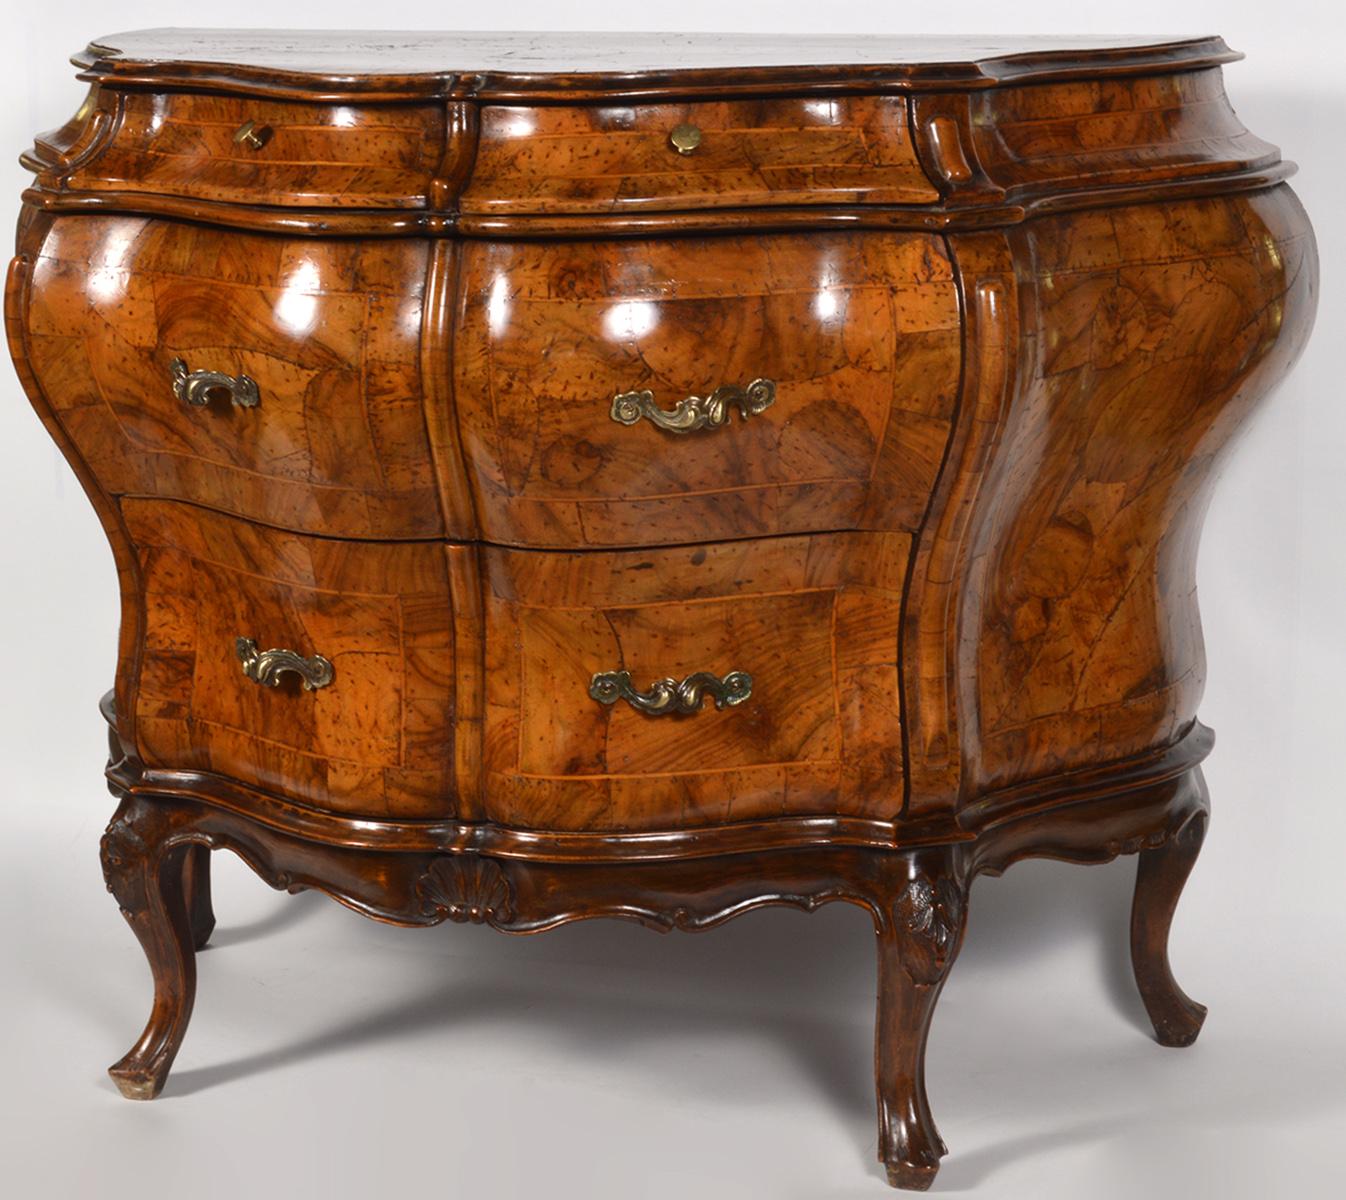 Rococo Early 20th Century Italian Sculptural Olive Wood Parquetry Bombe Commode